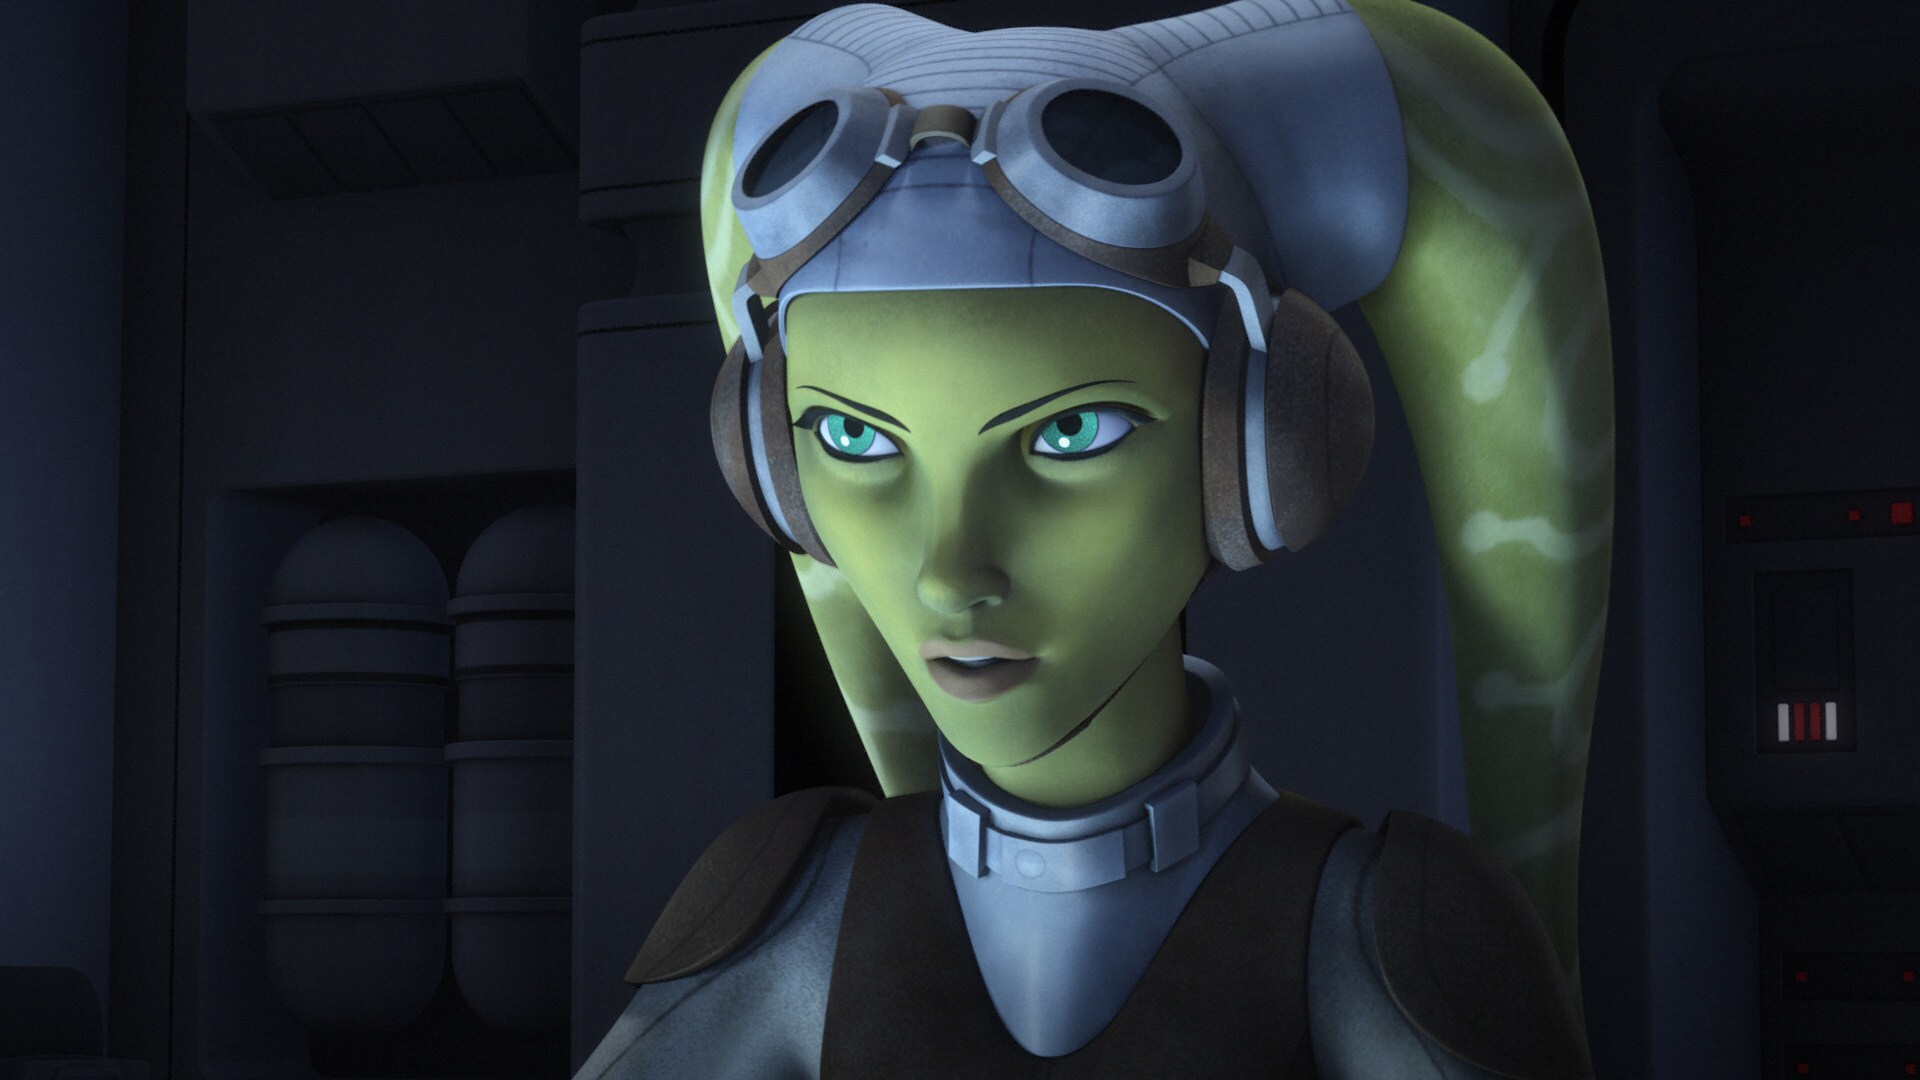 They agree to pay the Mandalorians a visit. Hera will lead the mission, and Sabine will tag along.